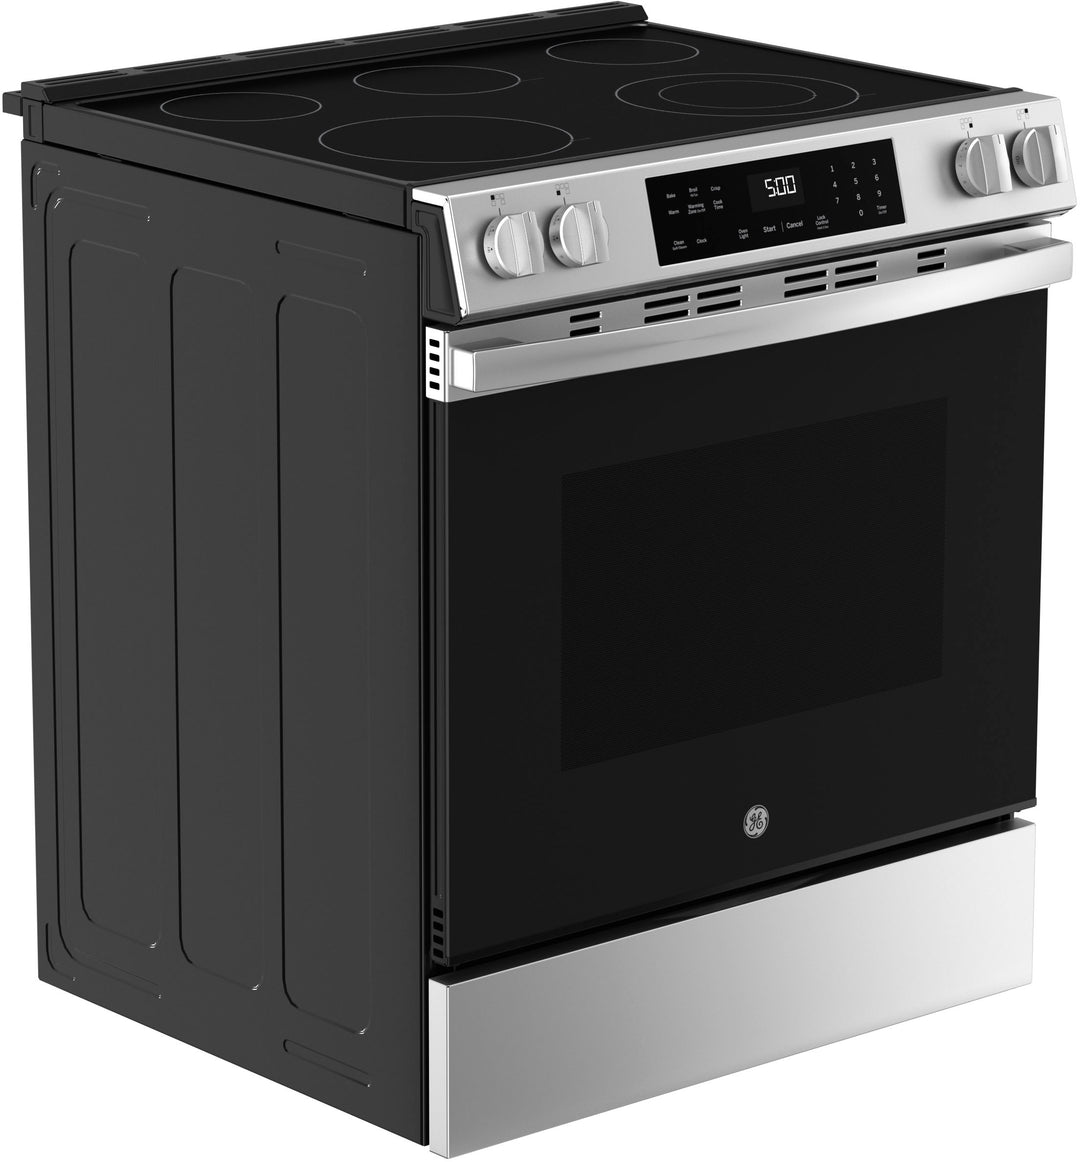 GE - 5.3 Cu. Ft. Slide-In Electric Range with Self-Clean and Steam Cleaning Option and Crisp Mode - Stainless Steel_18